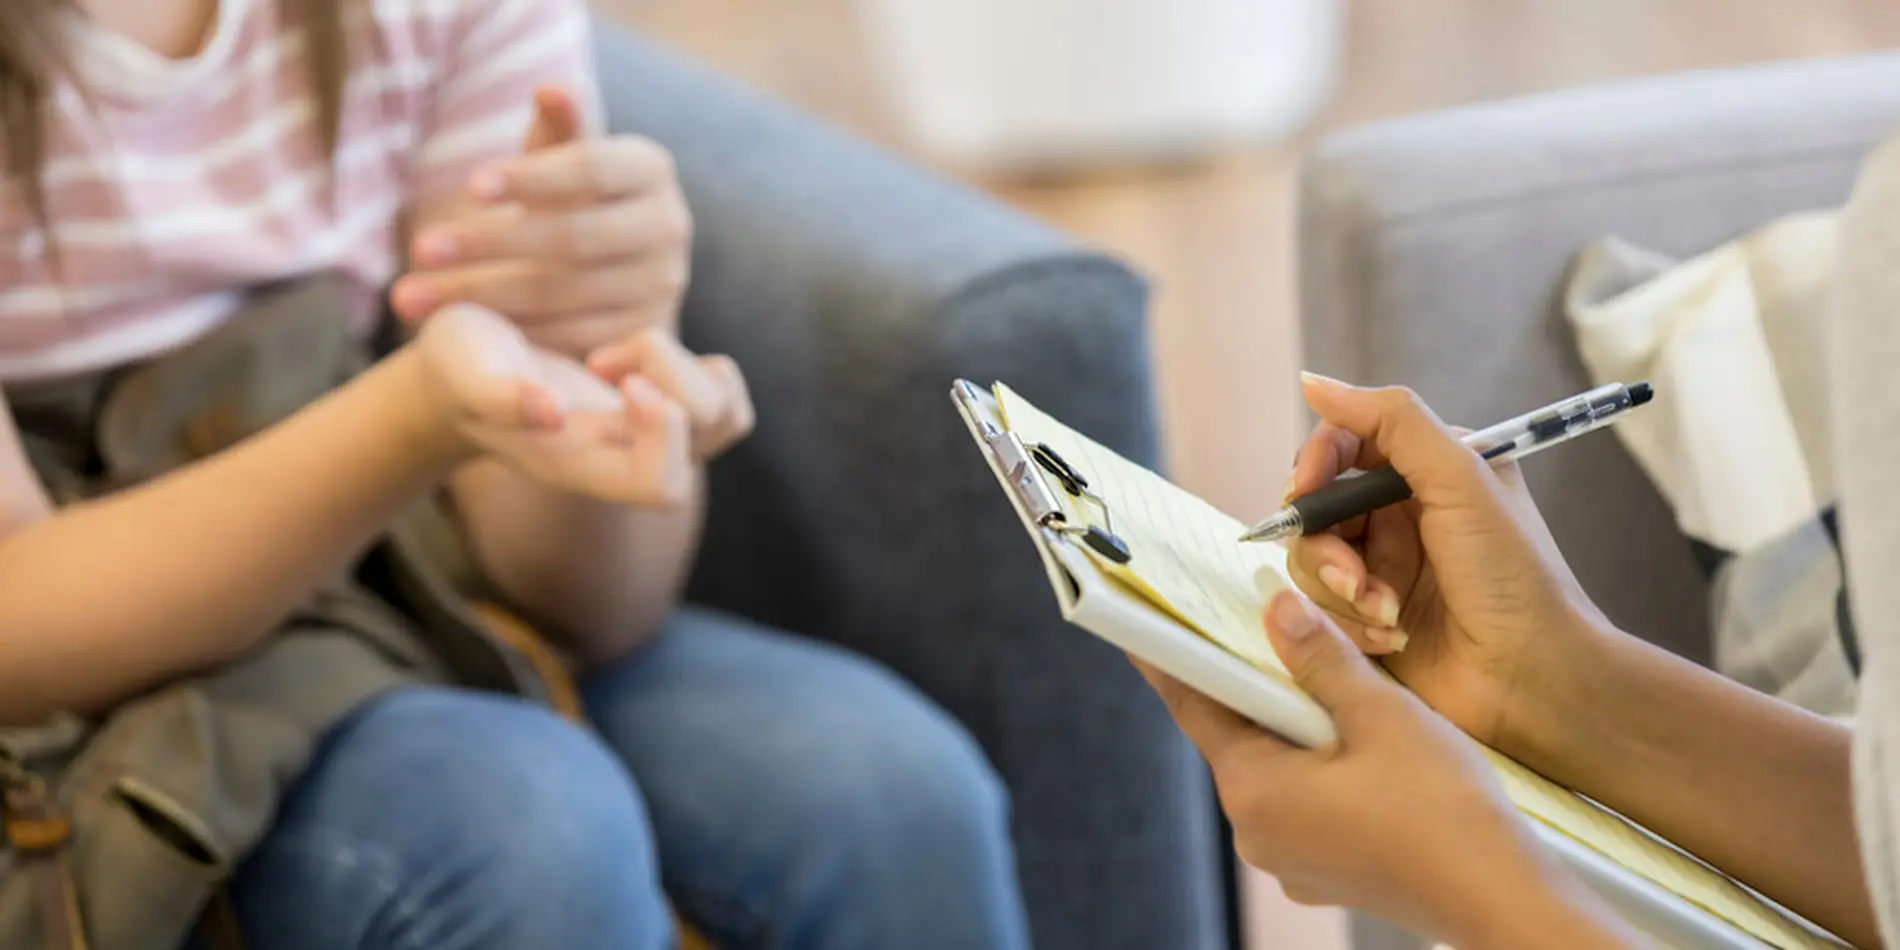 Teenager's hands show emotion while therapist takes notes.